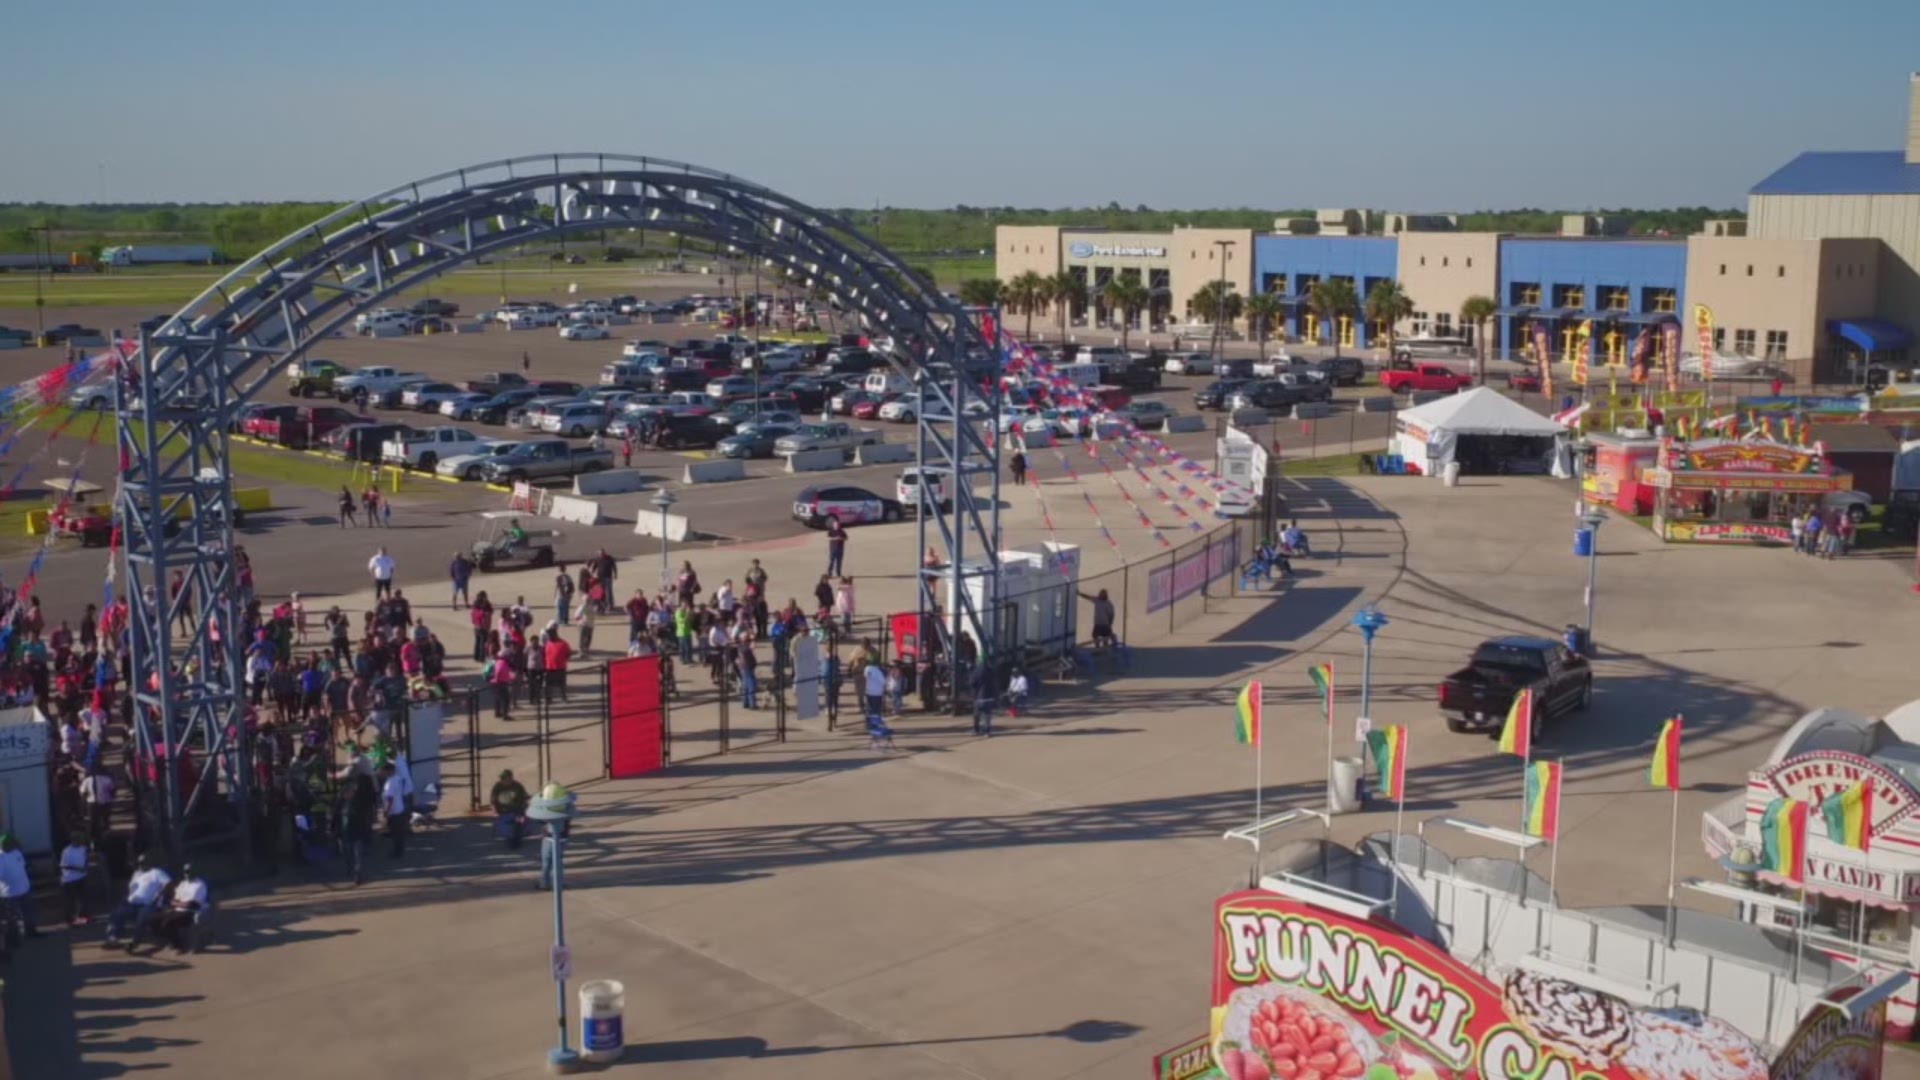 2018 South Texas State Fair: Events, entertainment, schedule and information | 12newsnow.com